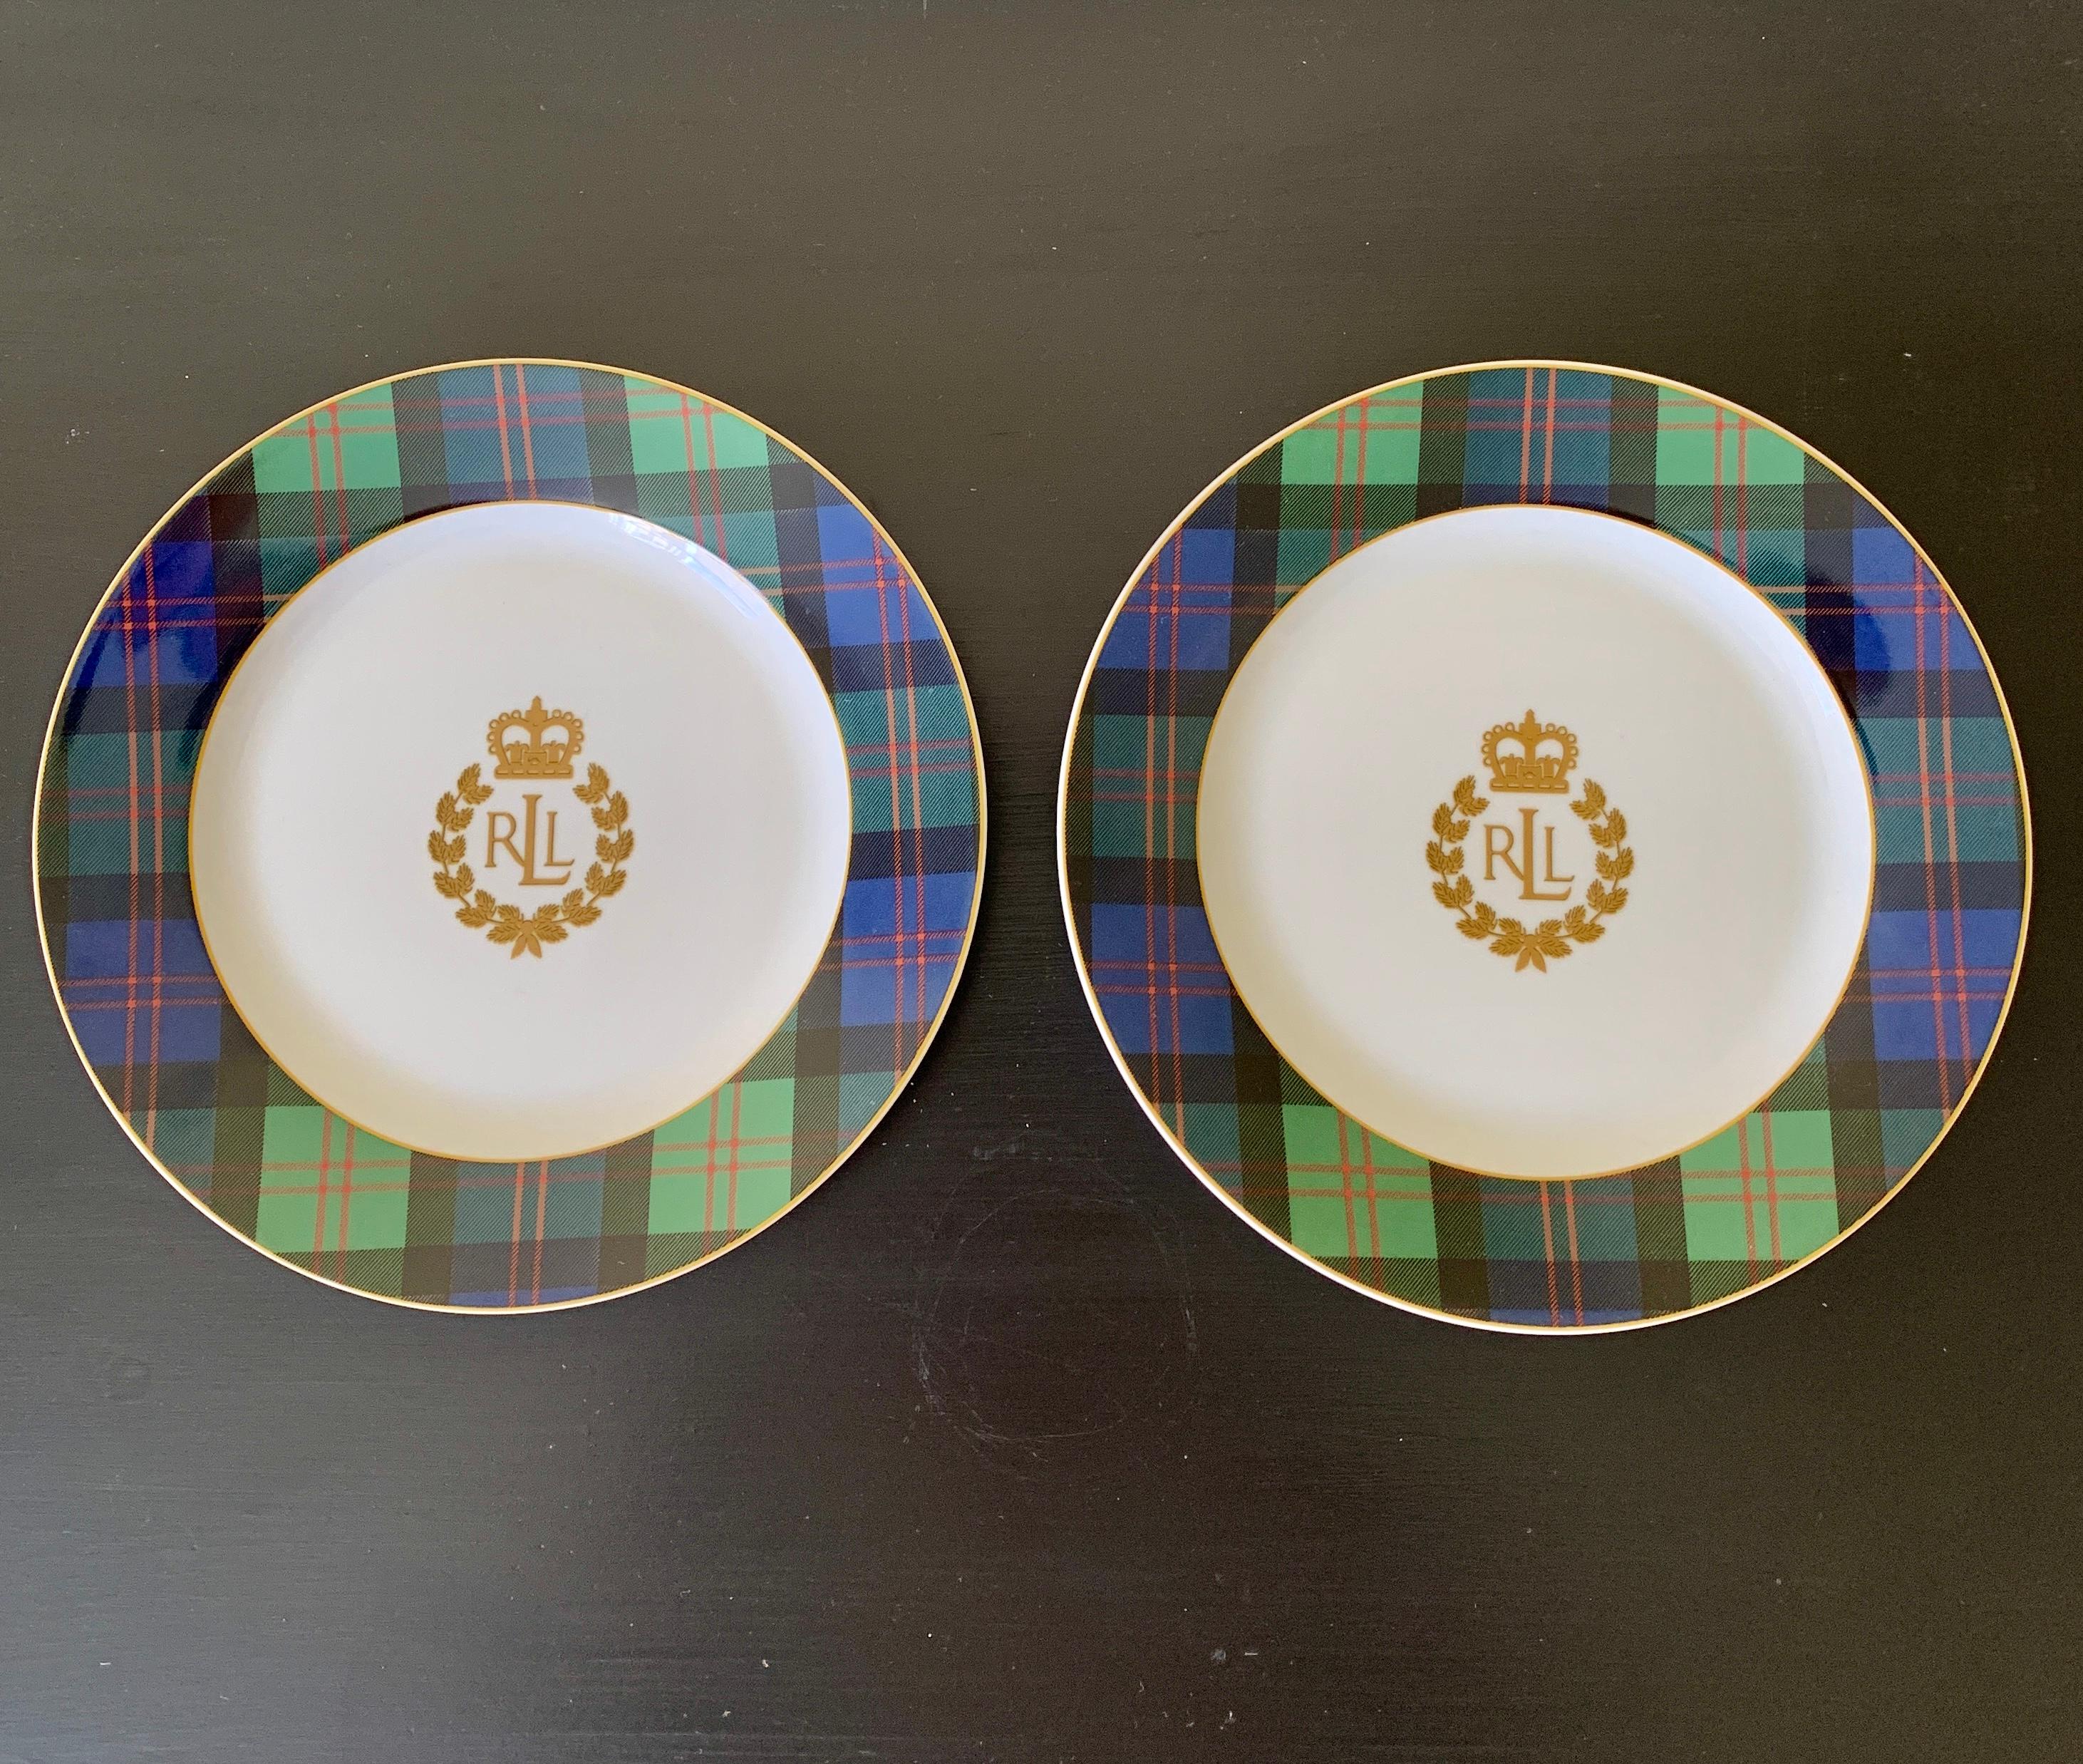 A gorgeous pair of decorative luncheon or wall plates with a tartan plaid pattern

By Ralph Lauren, 